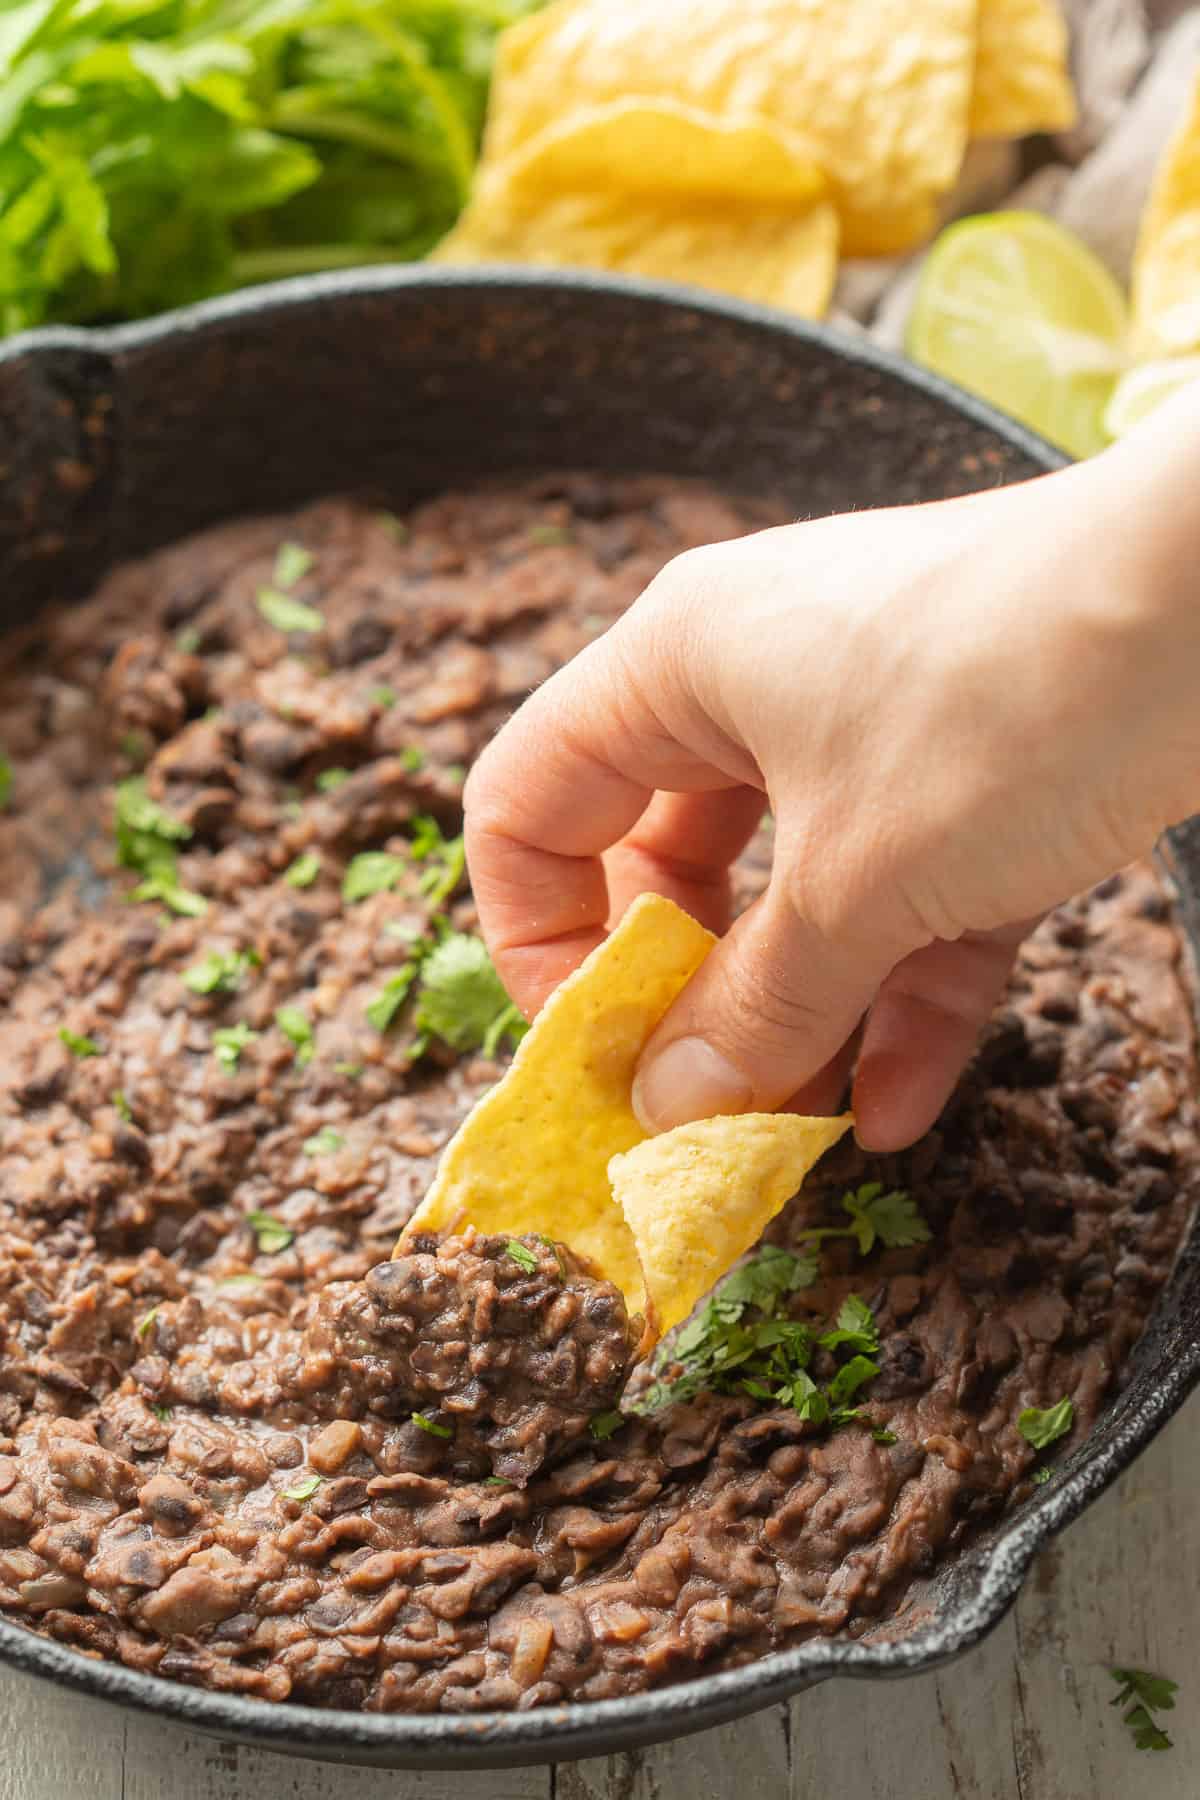 Dipping a tortilla chip hand into a skillet of refried black beans.